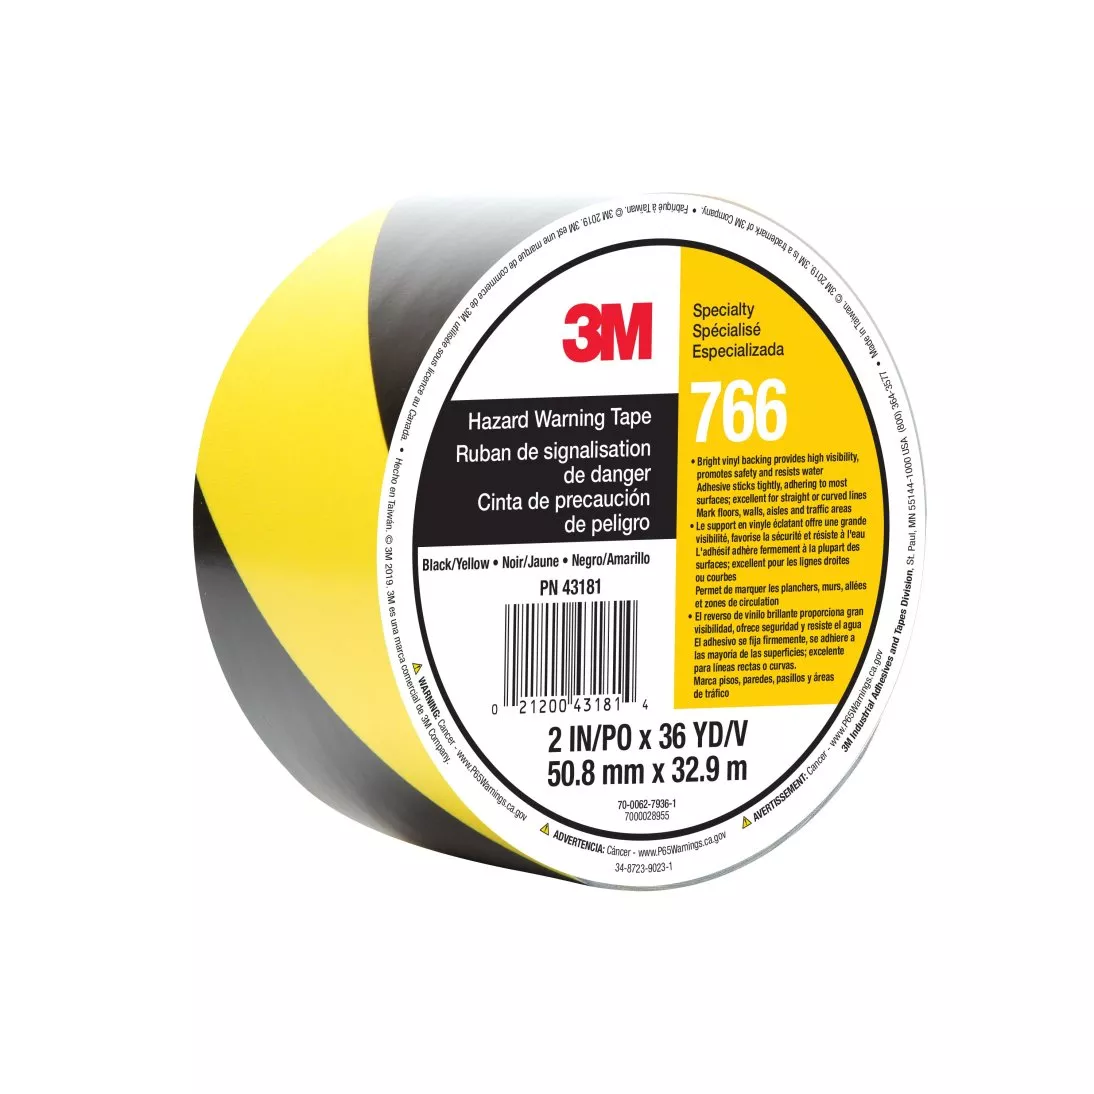 3M™ Safety Stripe Warning Tape 766, Black/Yellow, 2 in x 36 yd, 5 mil, 24 Roll/Case, Individually Wrapped Conveniently Packaged